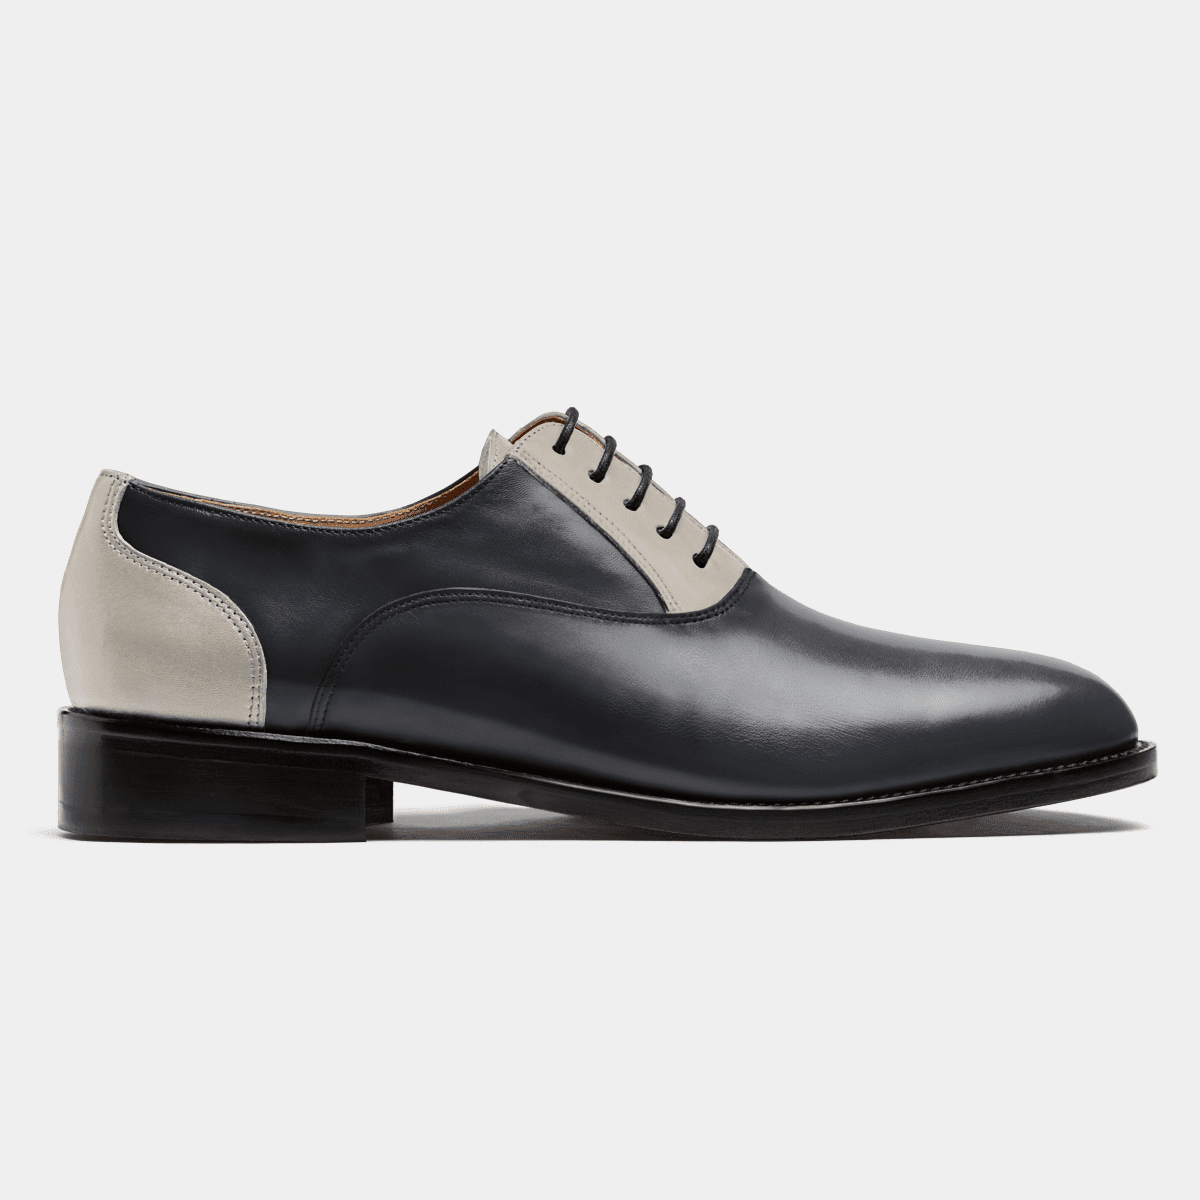 Oxford shoes in blue & white leather